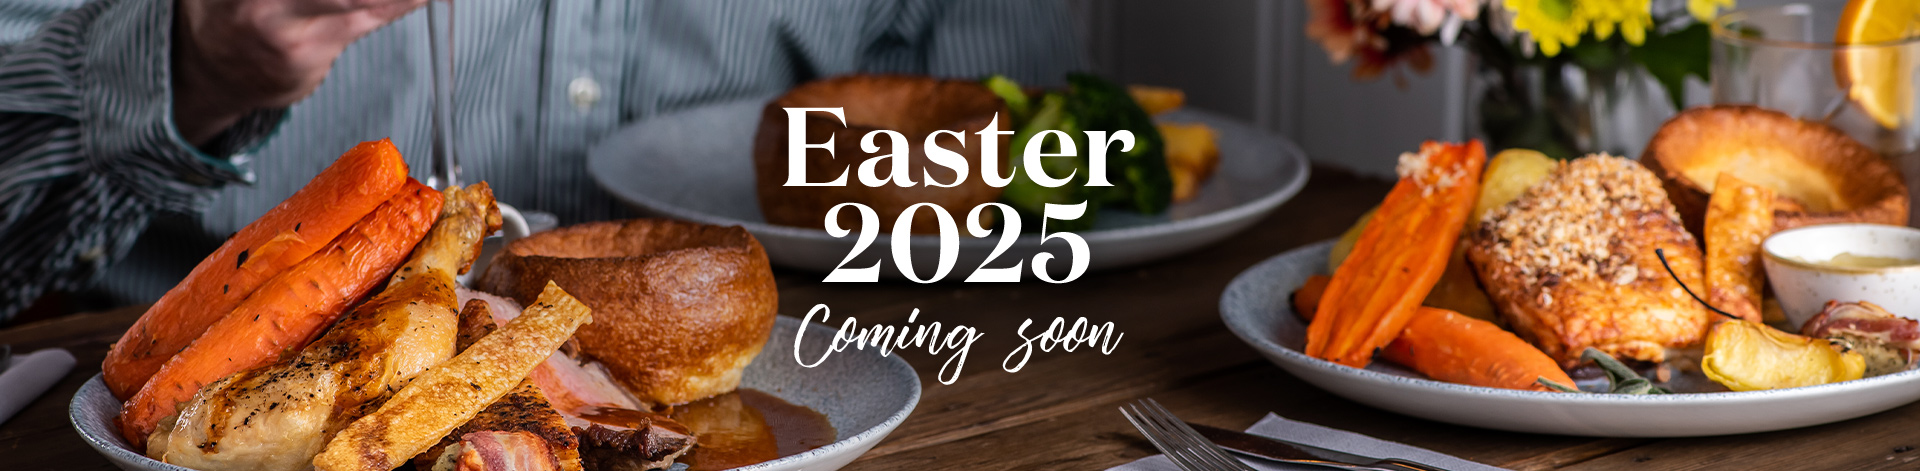 Easter at The Park Gate Inn in Maidstone